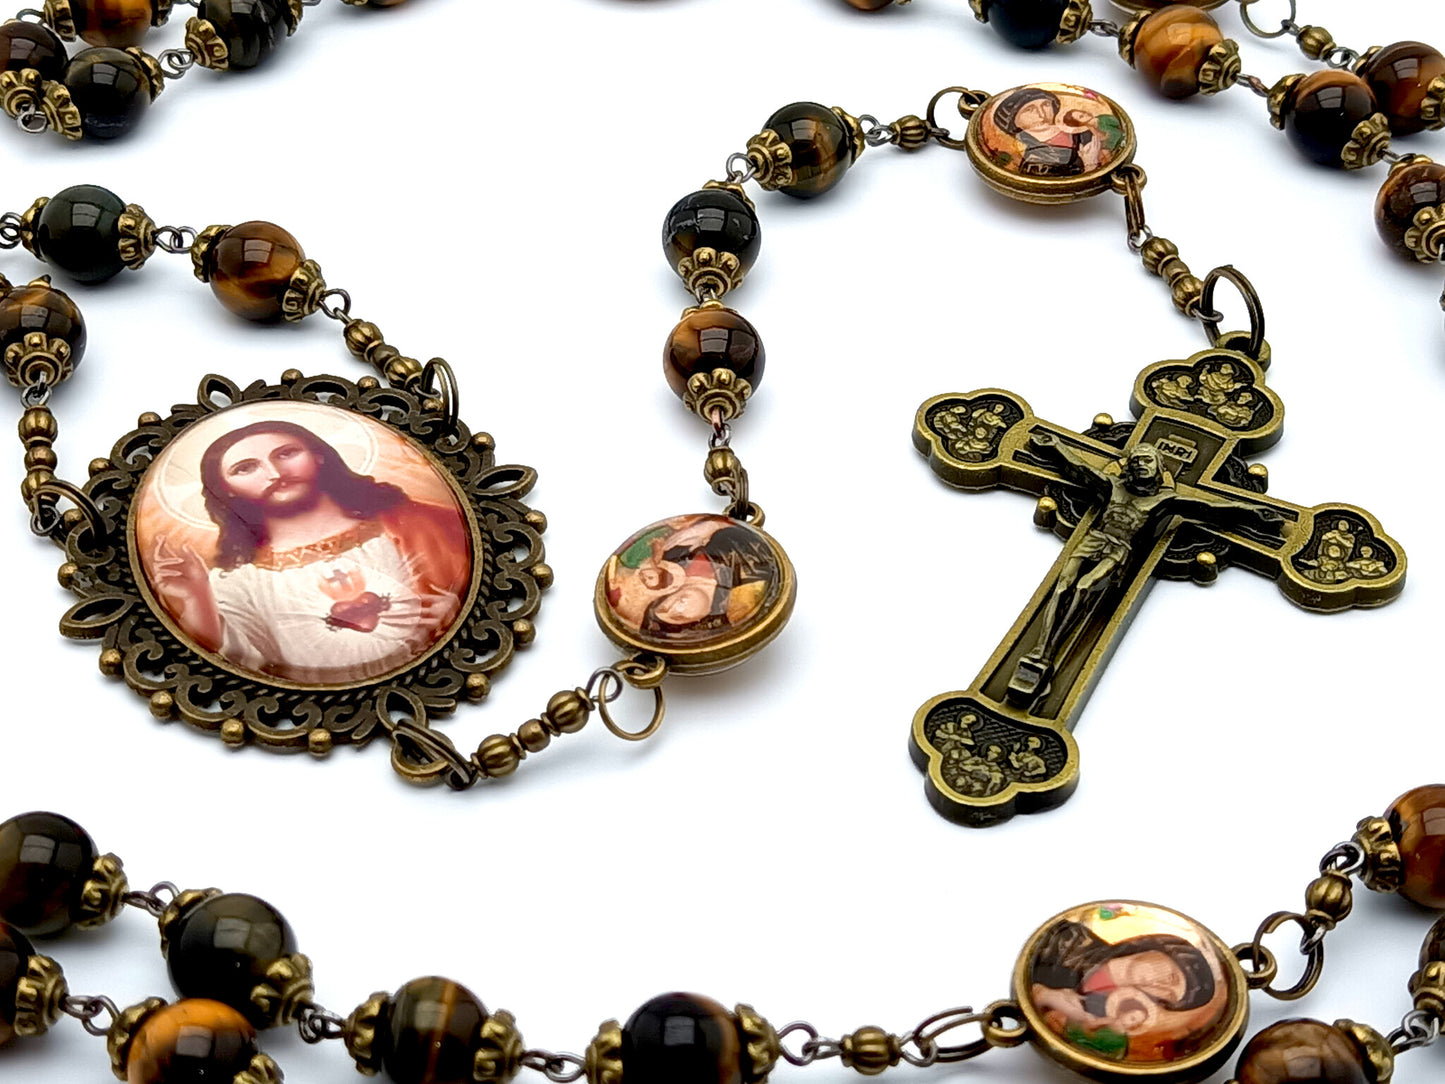 Sacred Heart unique rosary beads with tigers eye gemstone beads and Our Lady of Perpetual Help picture pater beads, bronze twelve apostles crucifix and picture centre medal.